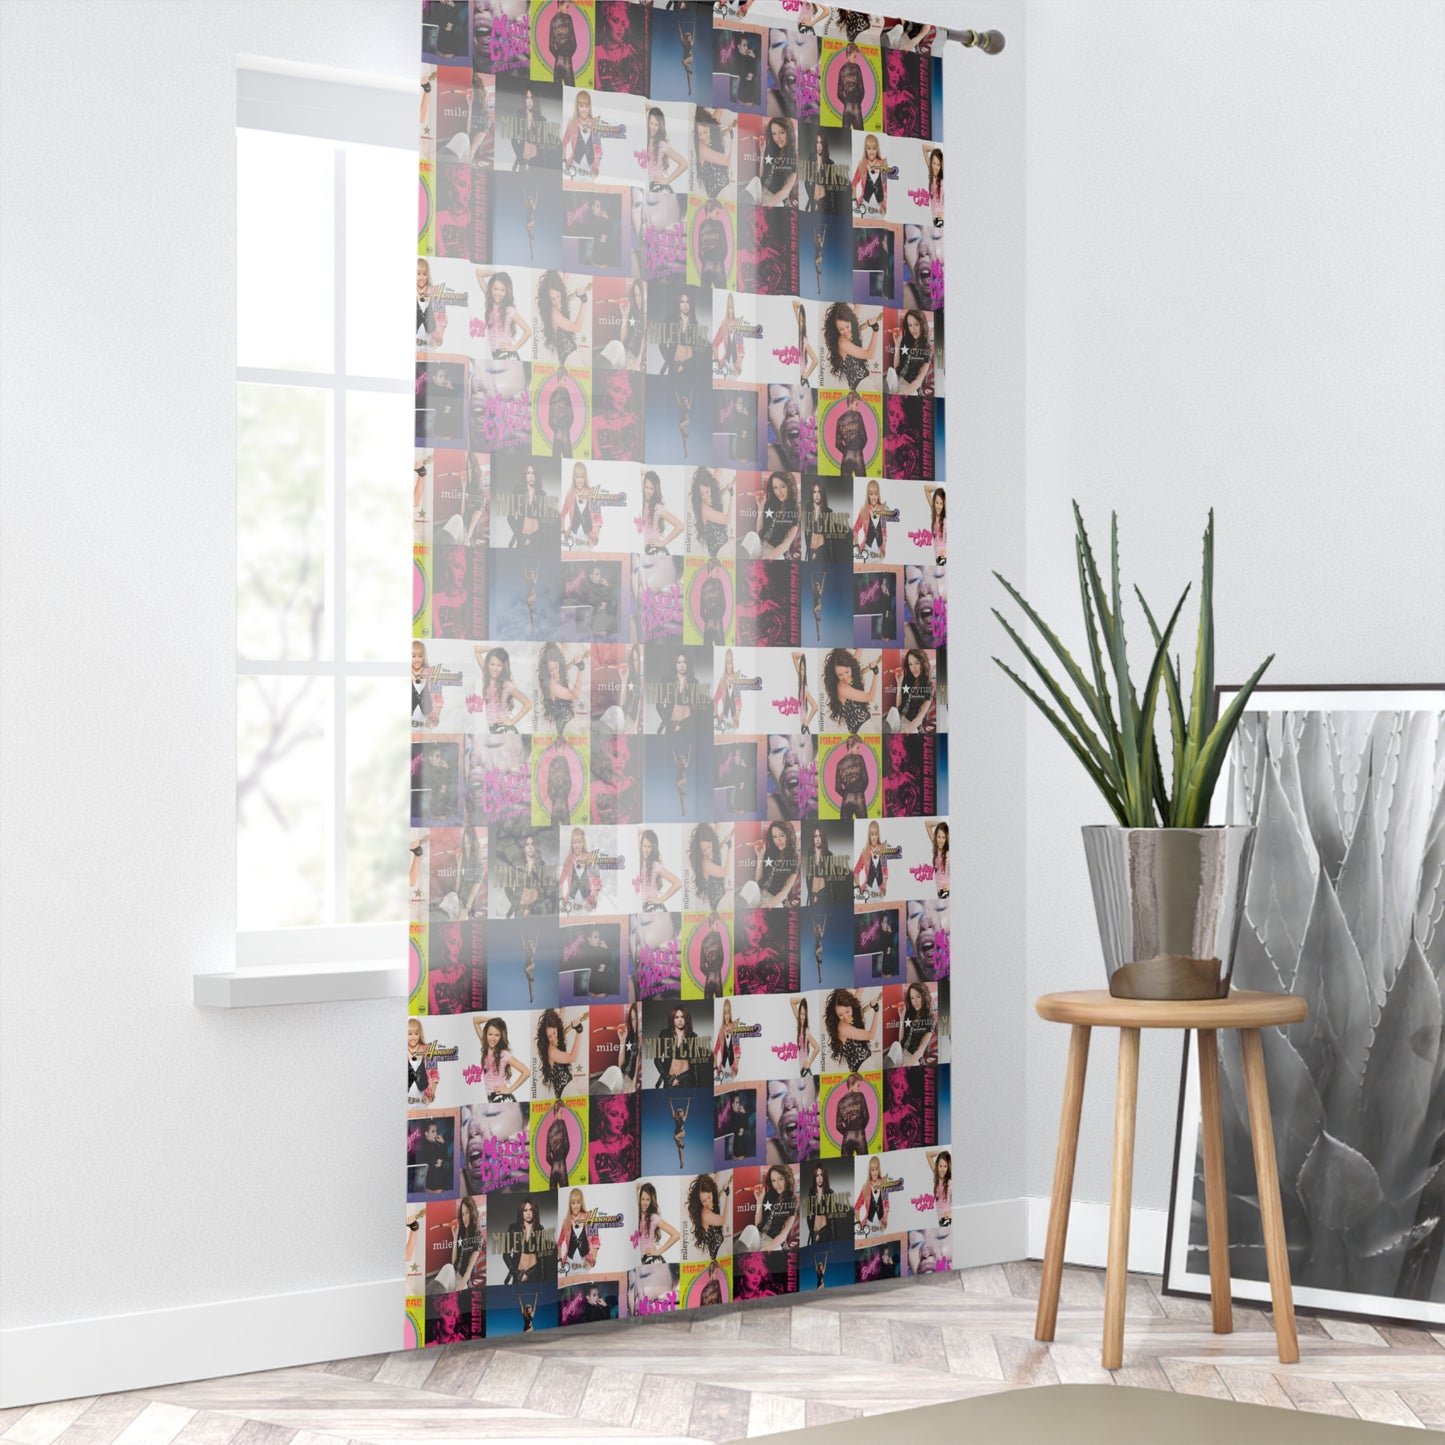 Miley Cyrus Album Cover Collage Window Curtain